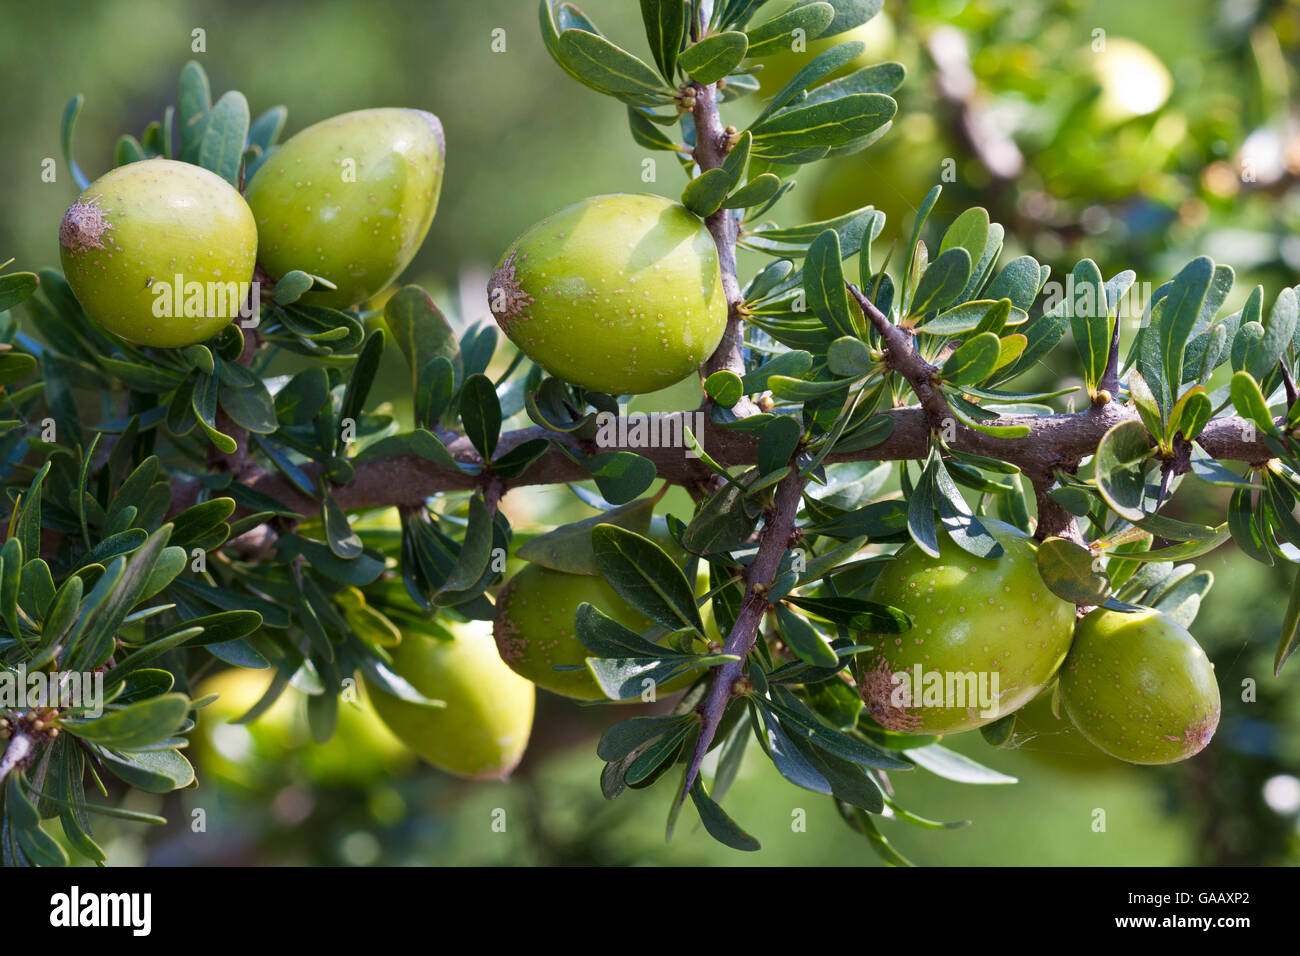 Argan tree (Argania spinosa) fruits, cultivated plant, endemic to ...